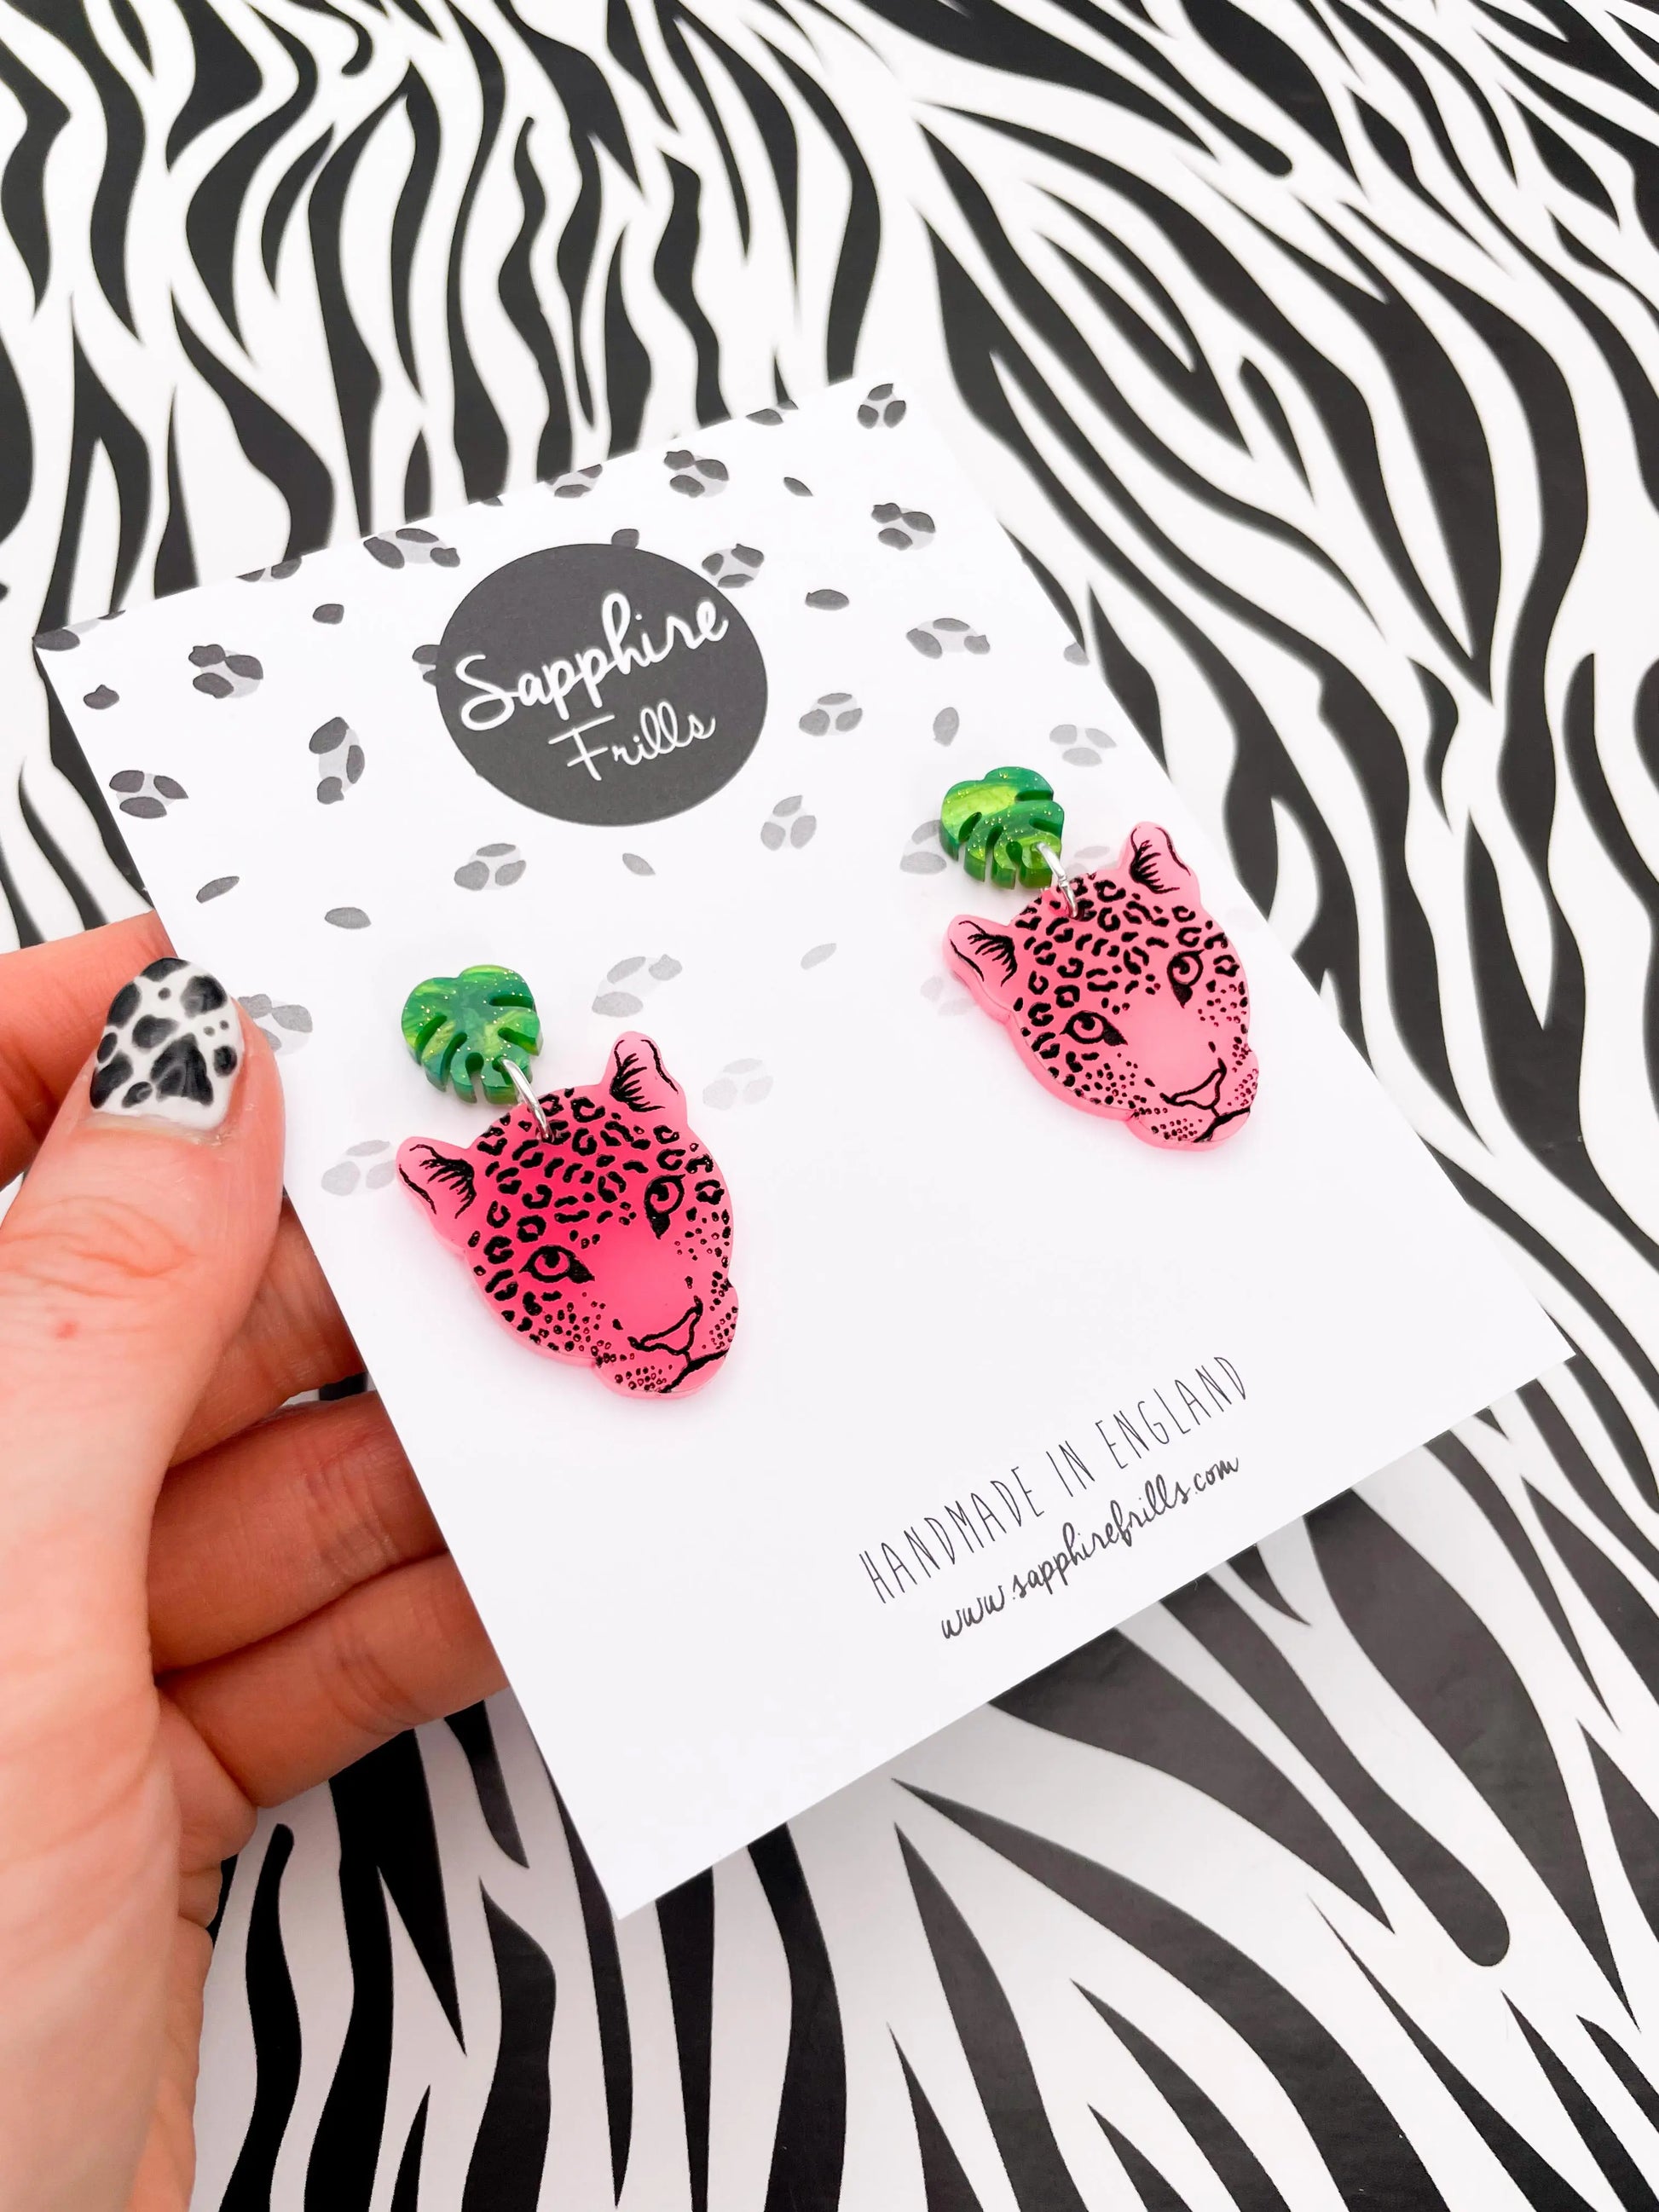 Green Marble and Neon Pink Acrylic Monstera Leaf & Leopard Face Dangle Earrings from Sapphire Frills